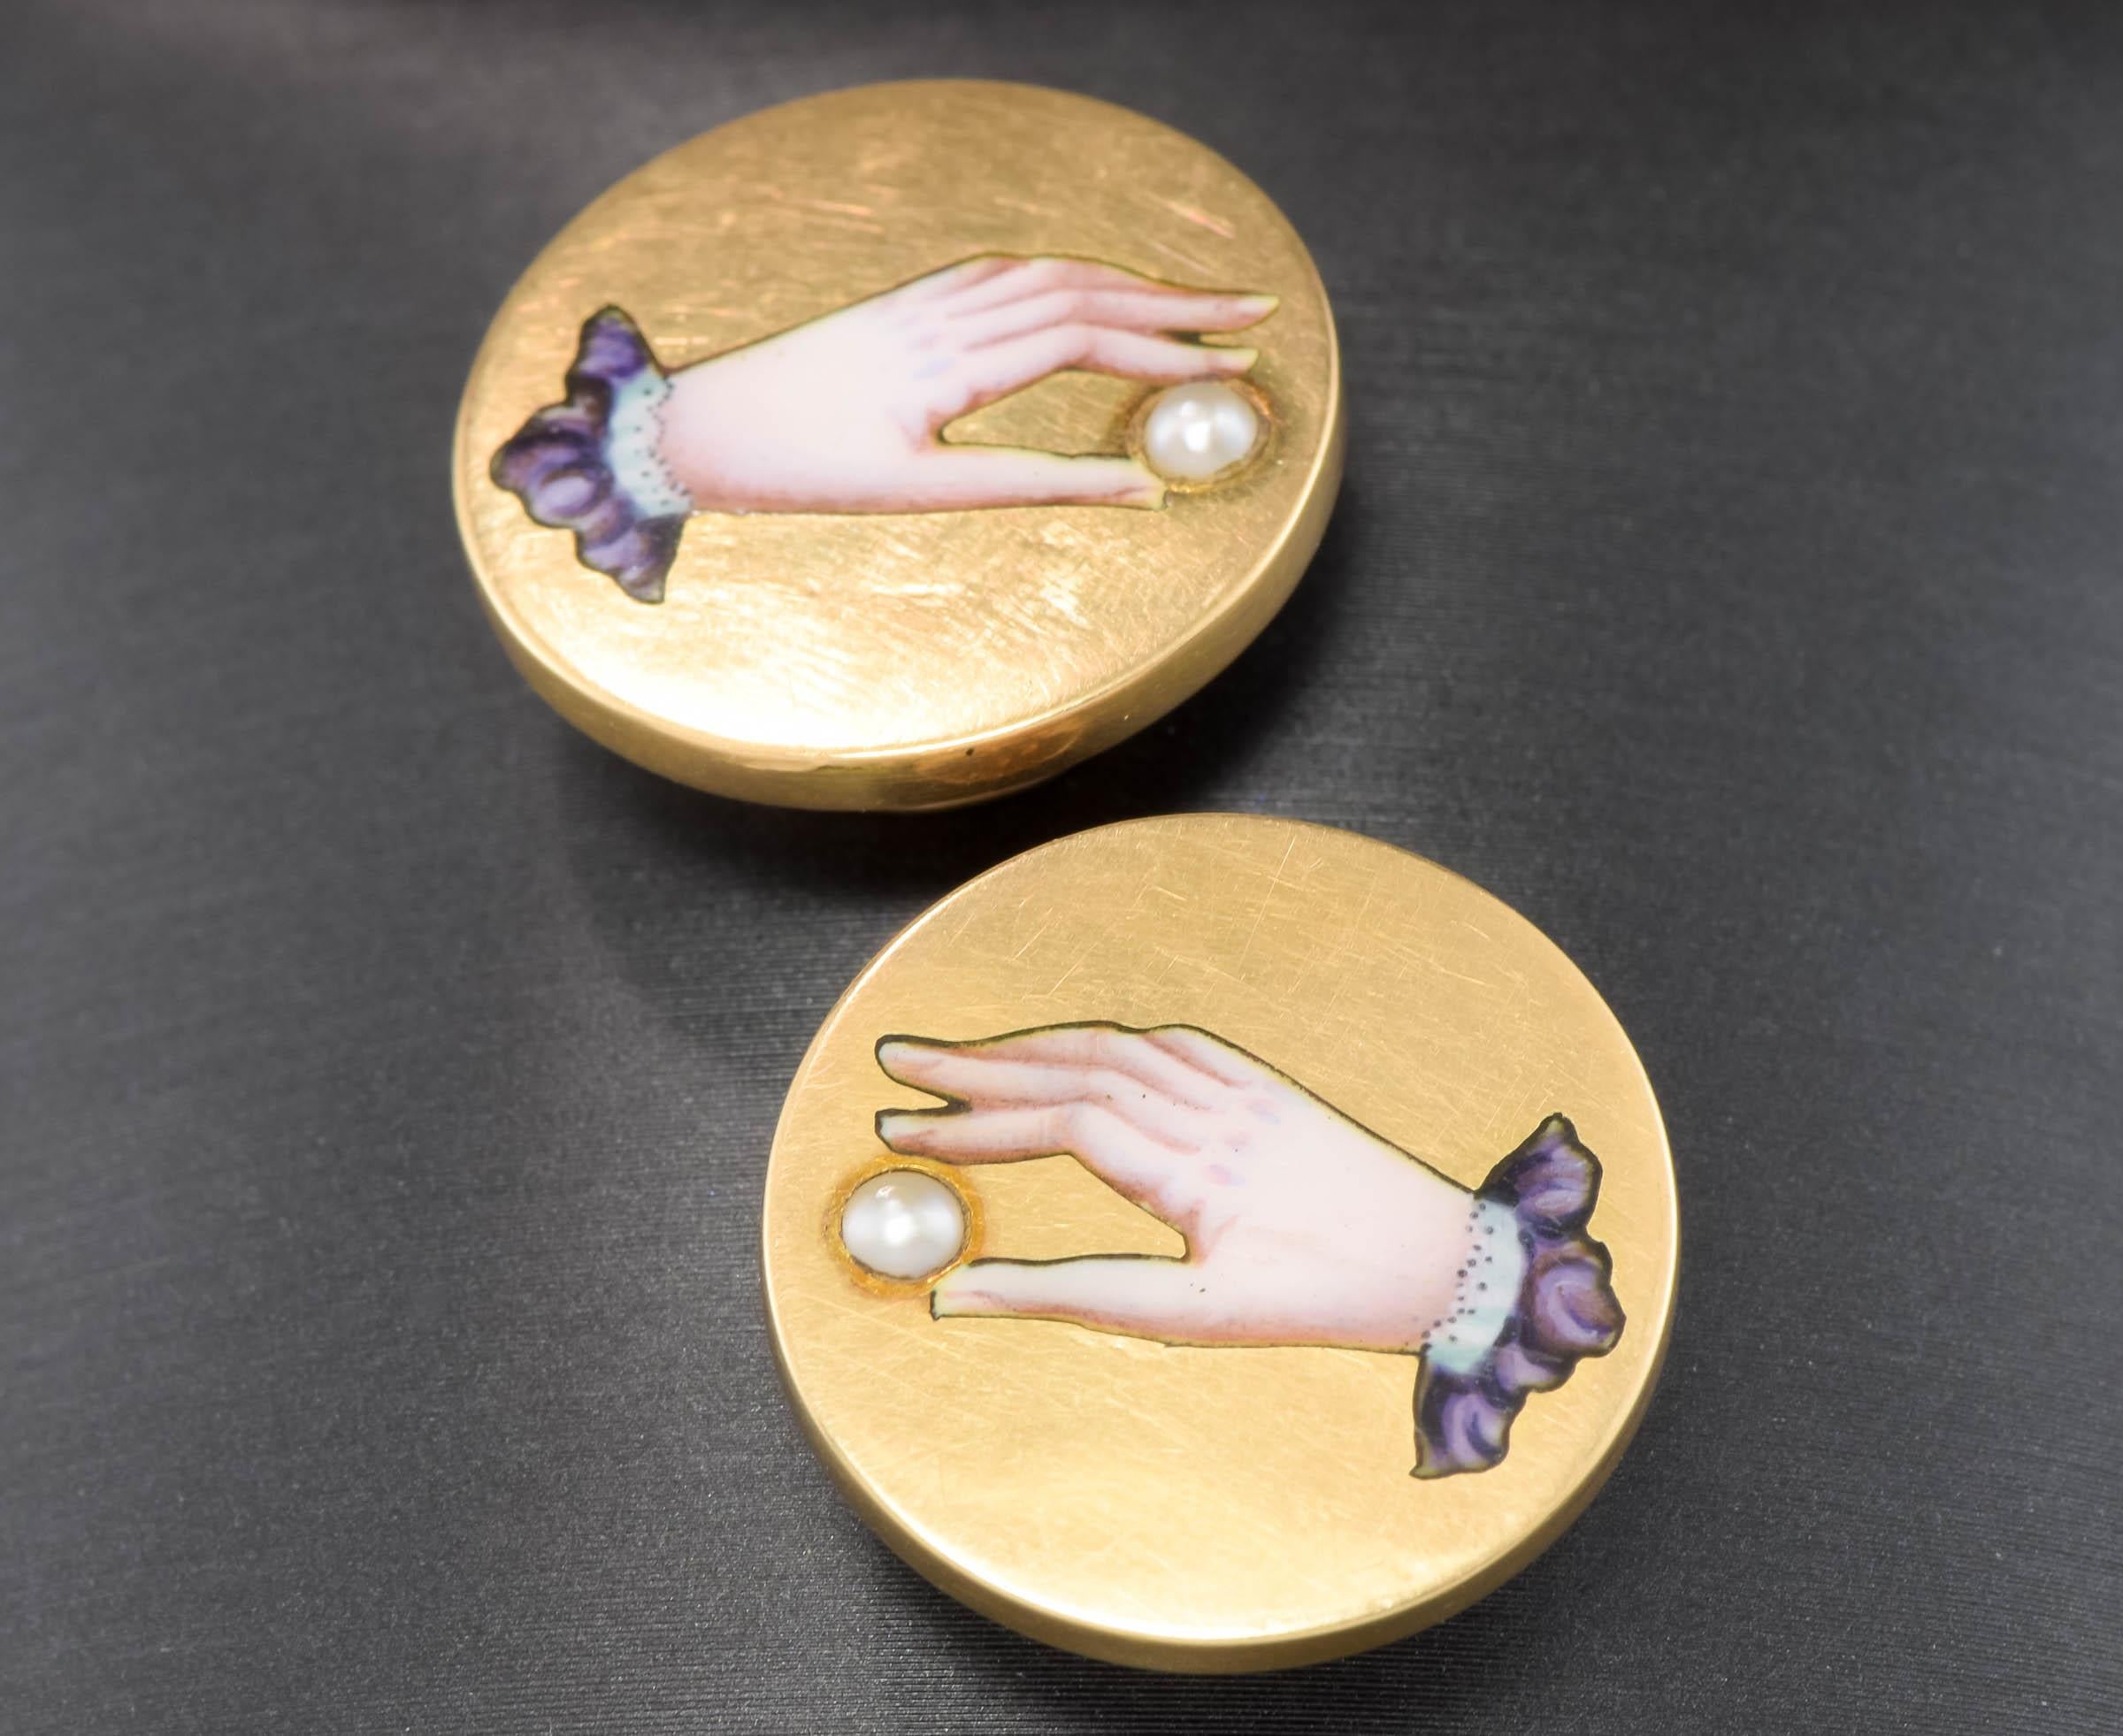 I'm delighted to offer a Victorian pair of antique button style cufflinks with lovely enamel hands holding a seed pearl.  They could also be converted into a wonderful pair of earrings or into pendants, if desired.

(please note that the first photo